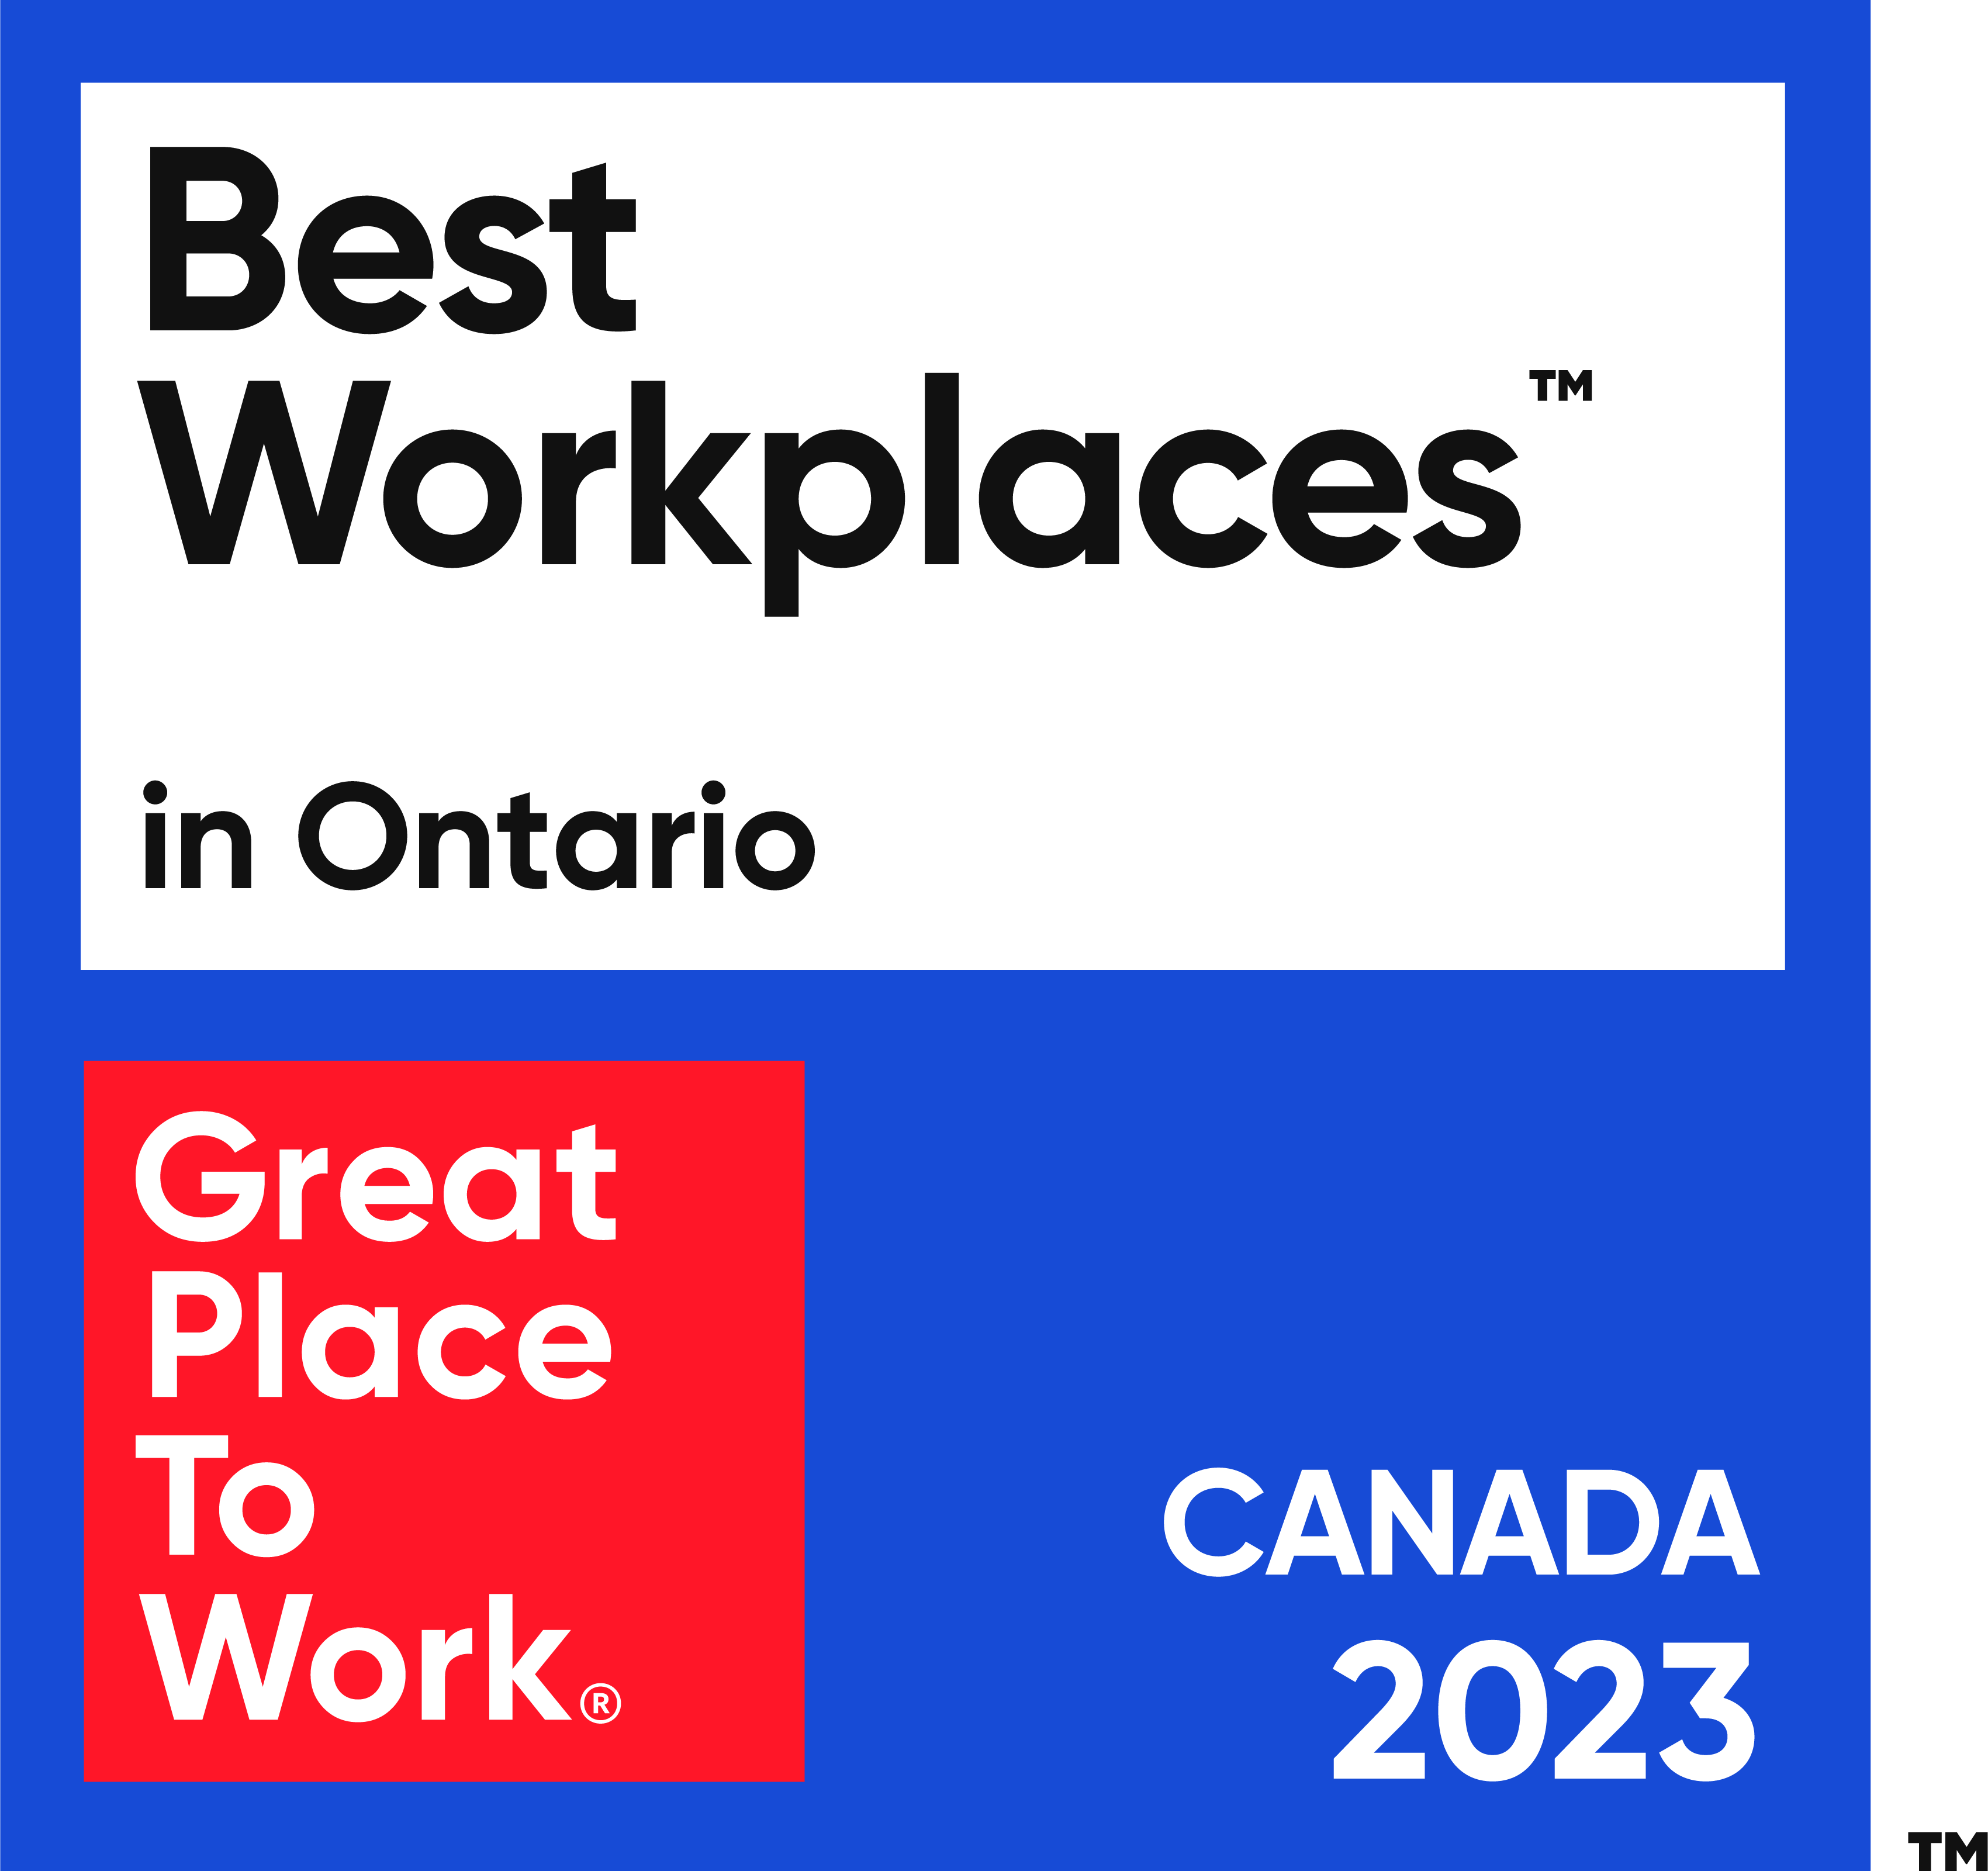 Best Workplaces in Ontario. Great Place To Work. Canada 2024